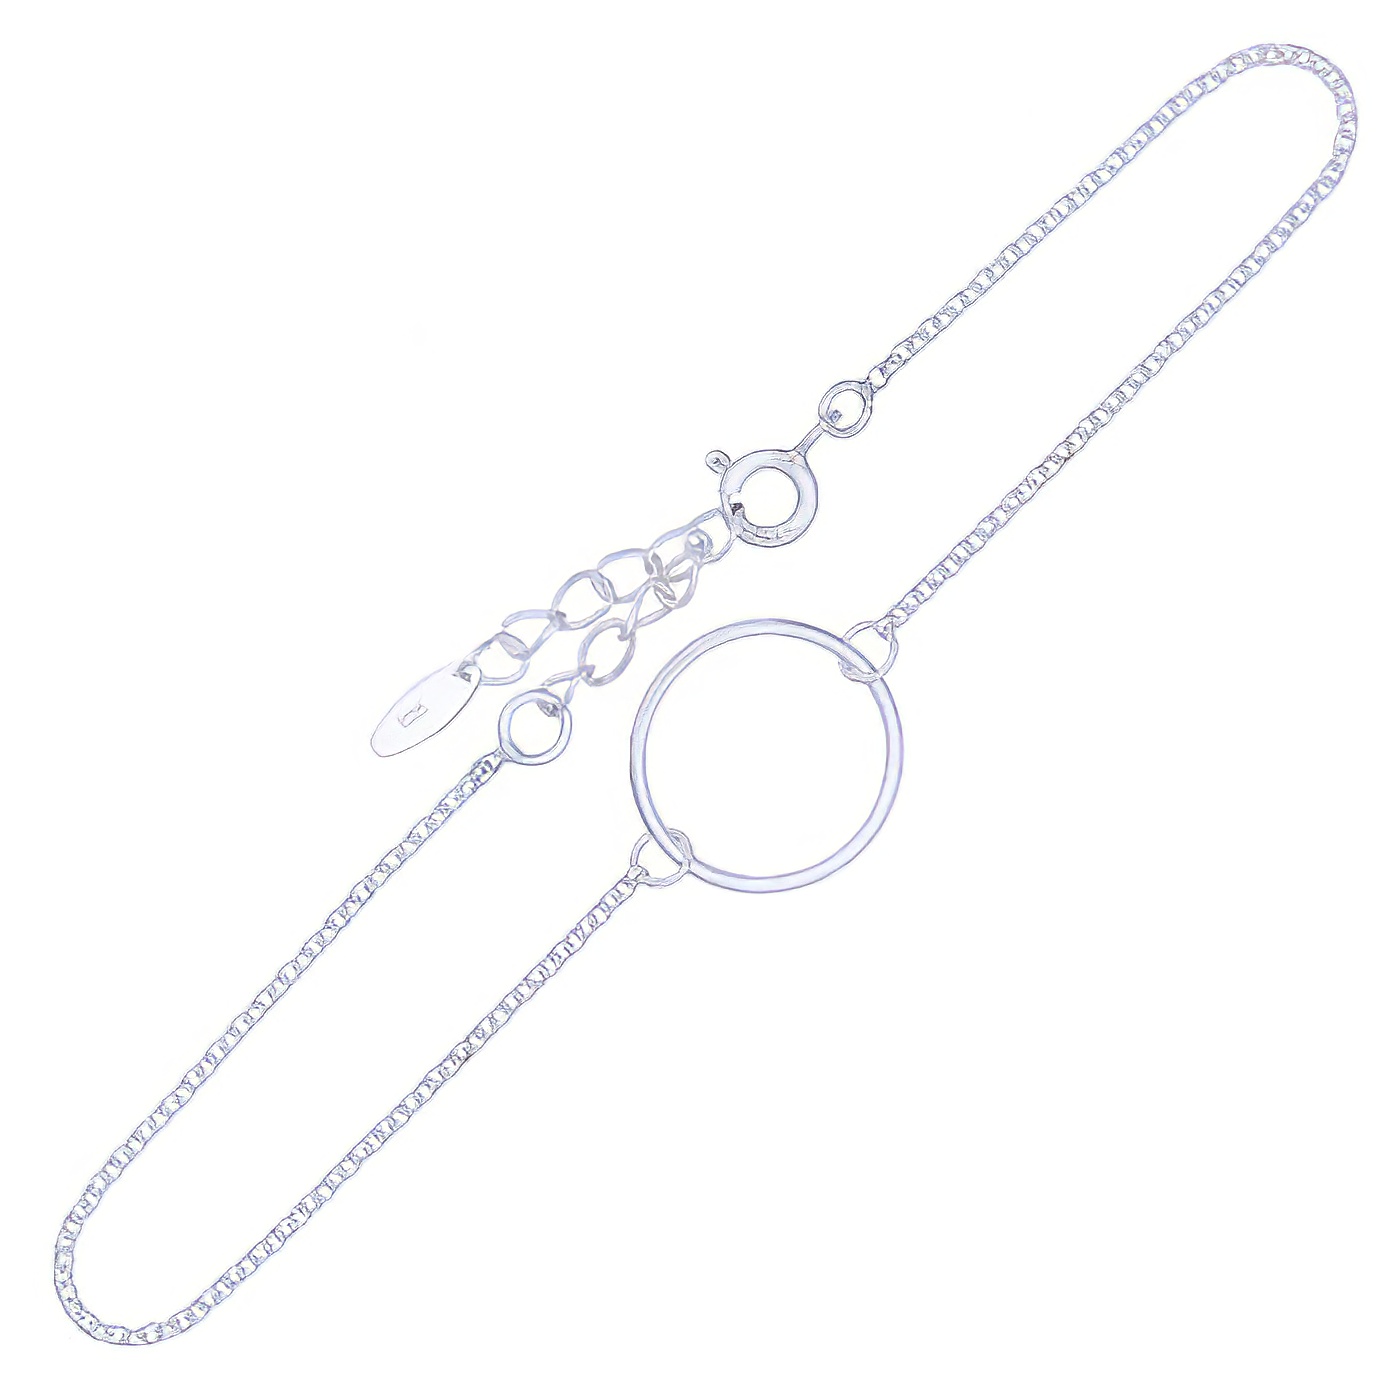 Circle Plain Charm In Sterling Silver Chain Bracelet 